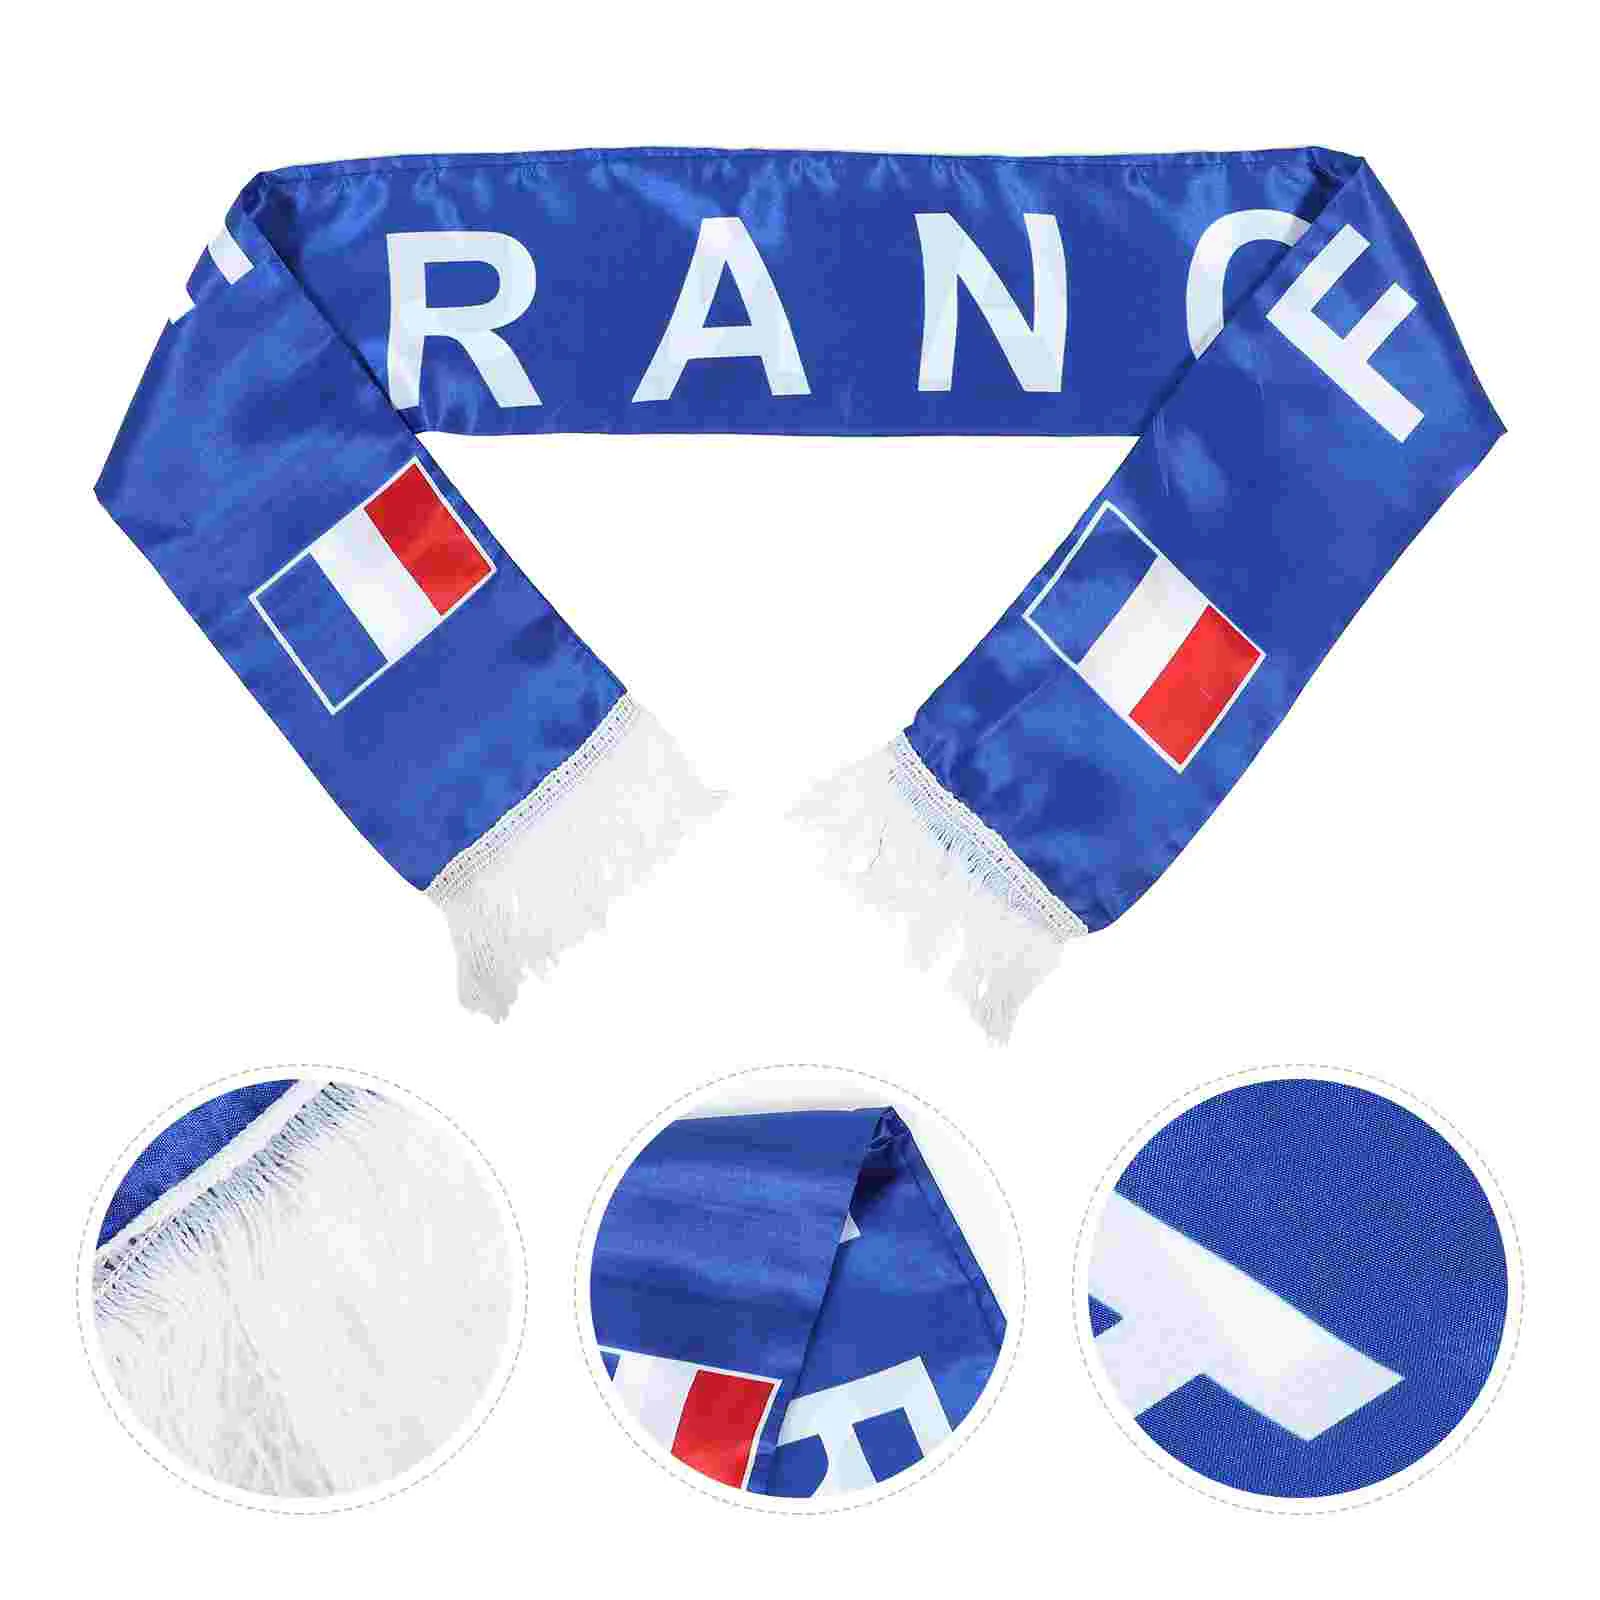 

2 Pcs Fans Scarf Patriots Knit Scarfs Gift Sports National Soccer Satin for Football